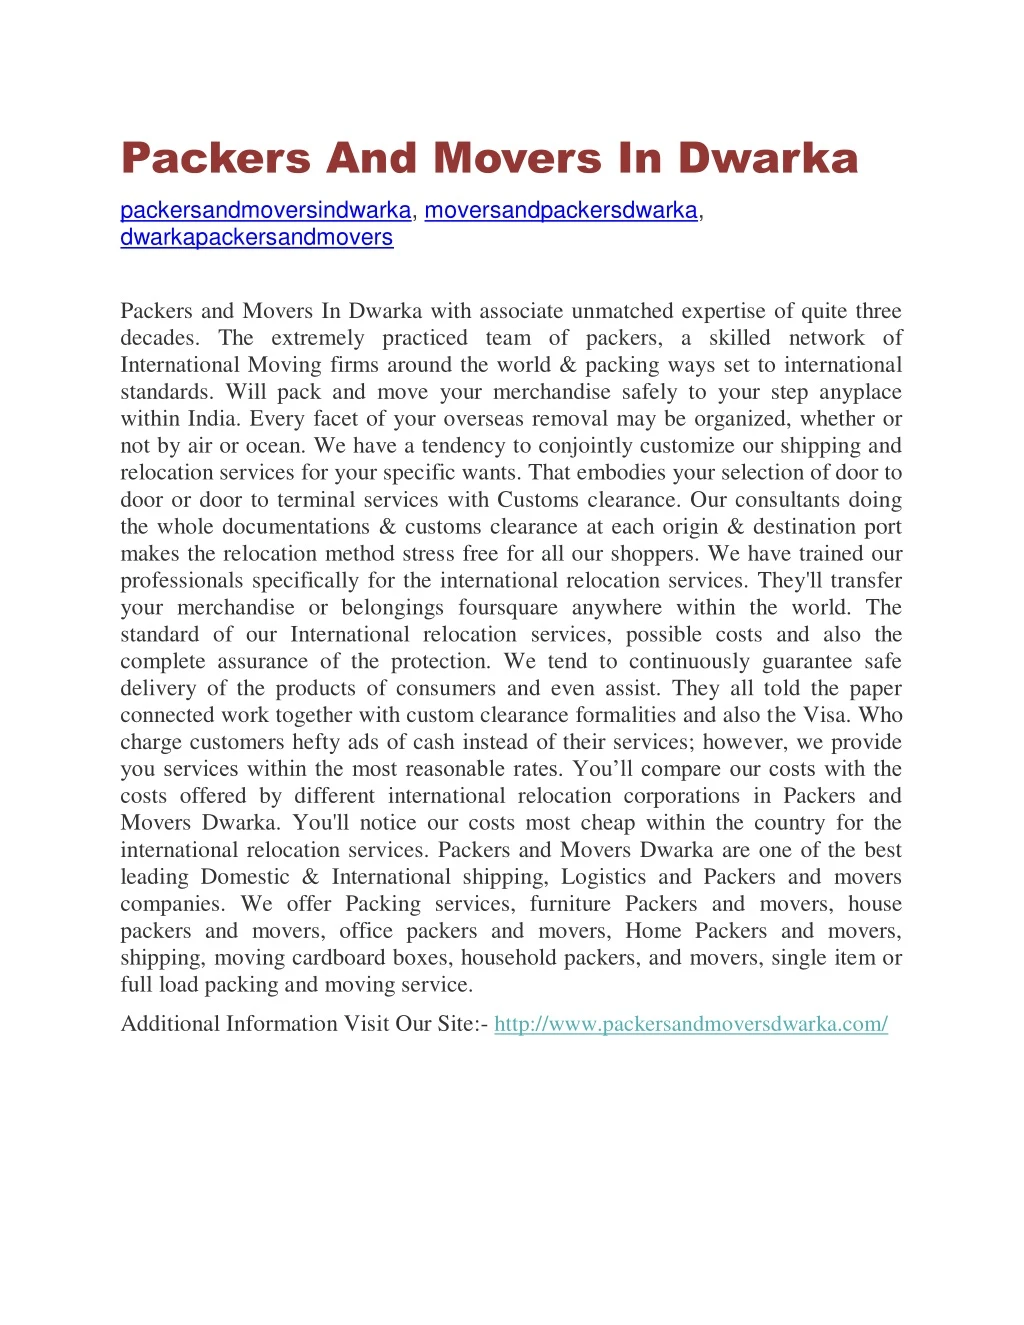 packers and movers in dwarka